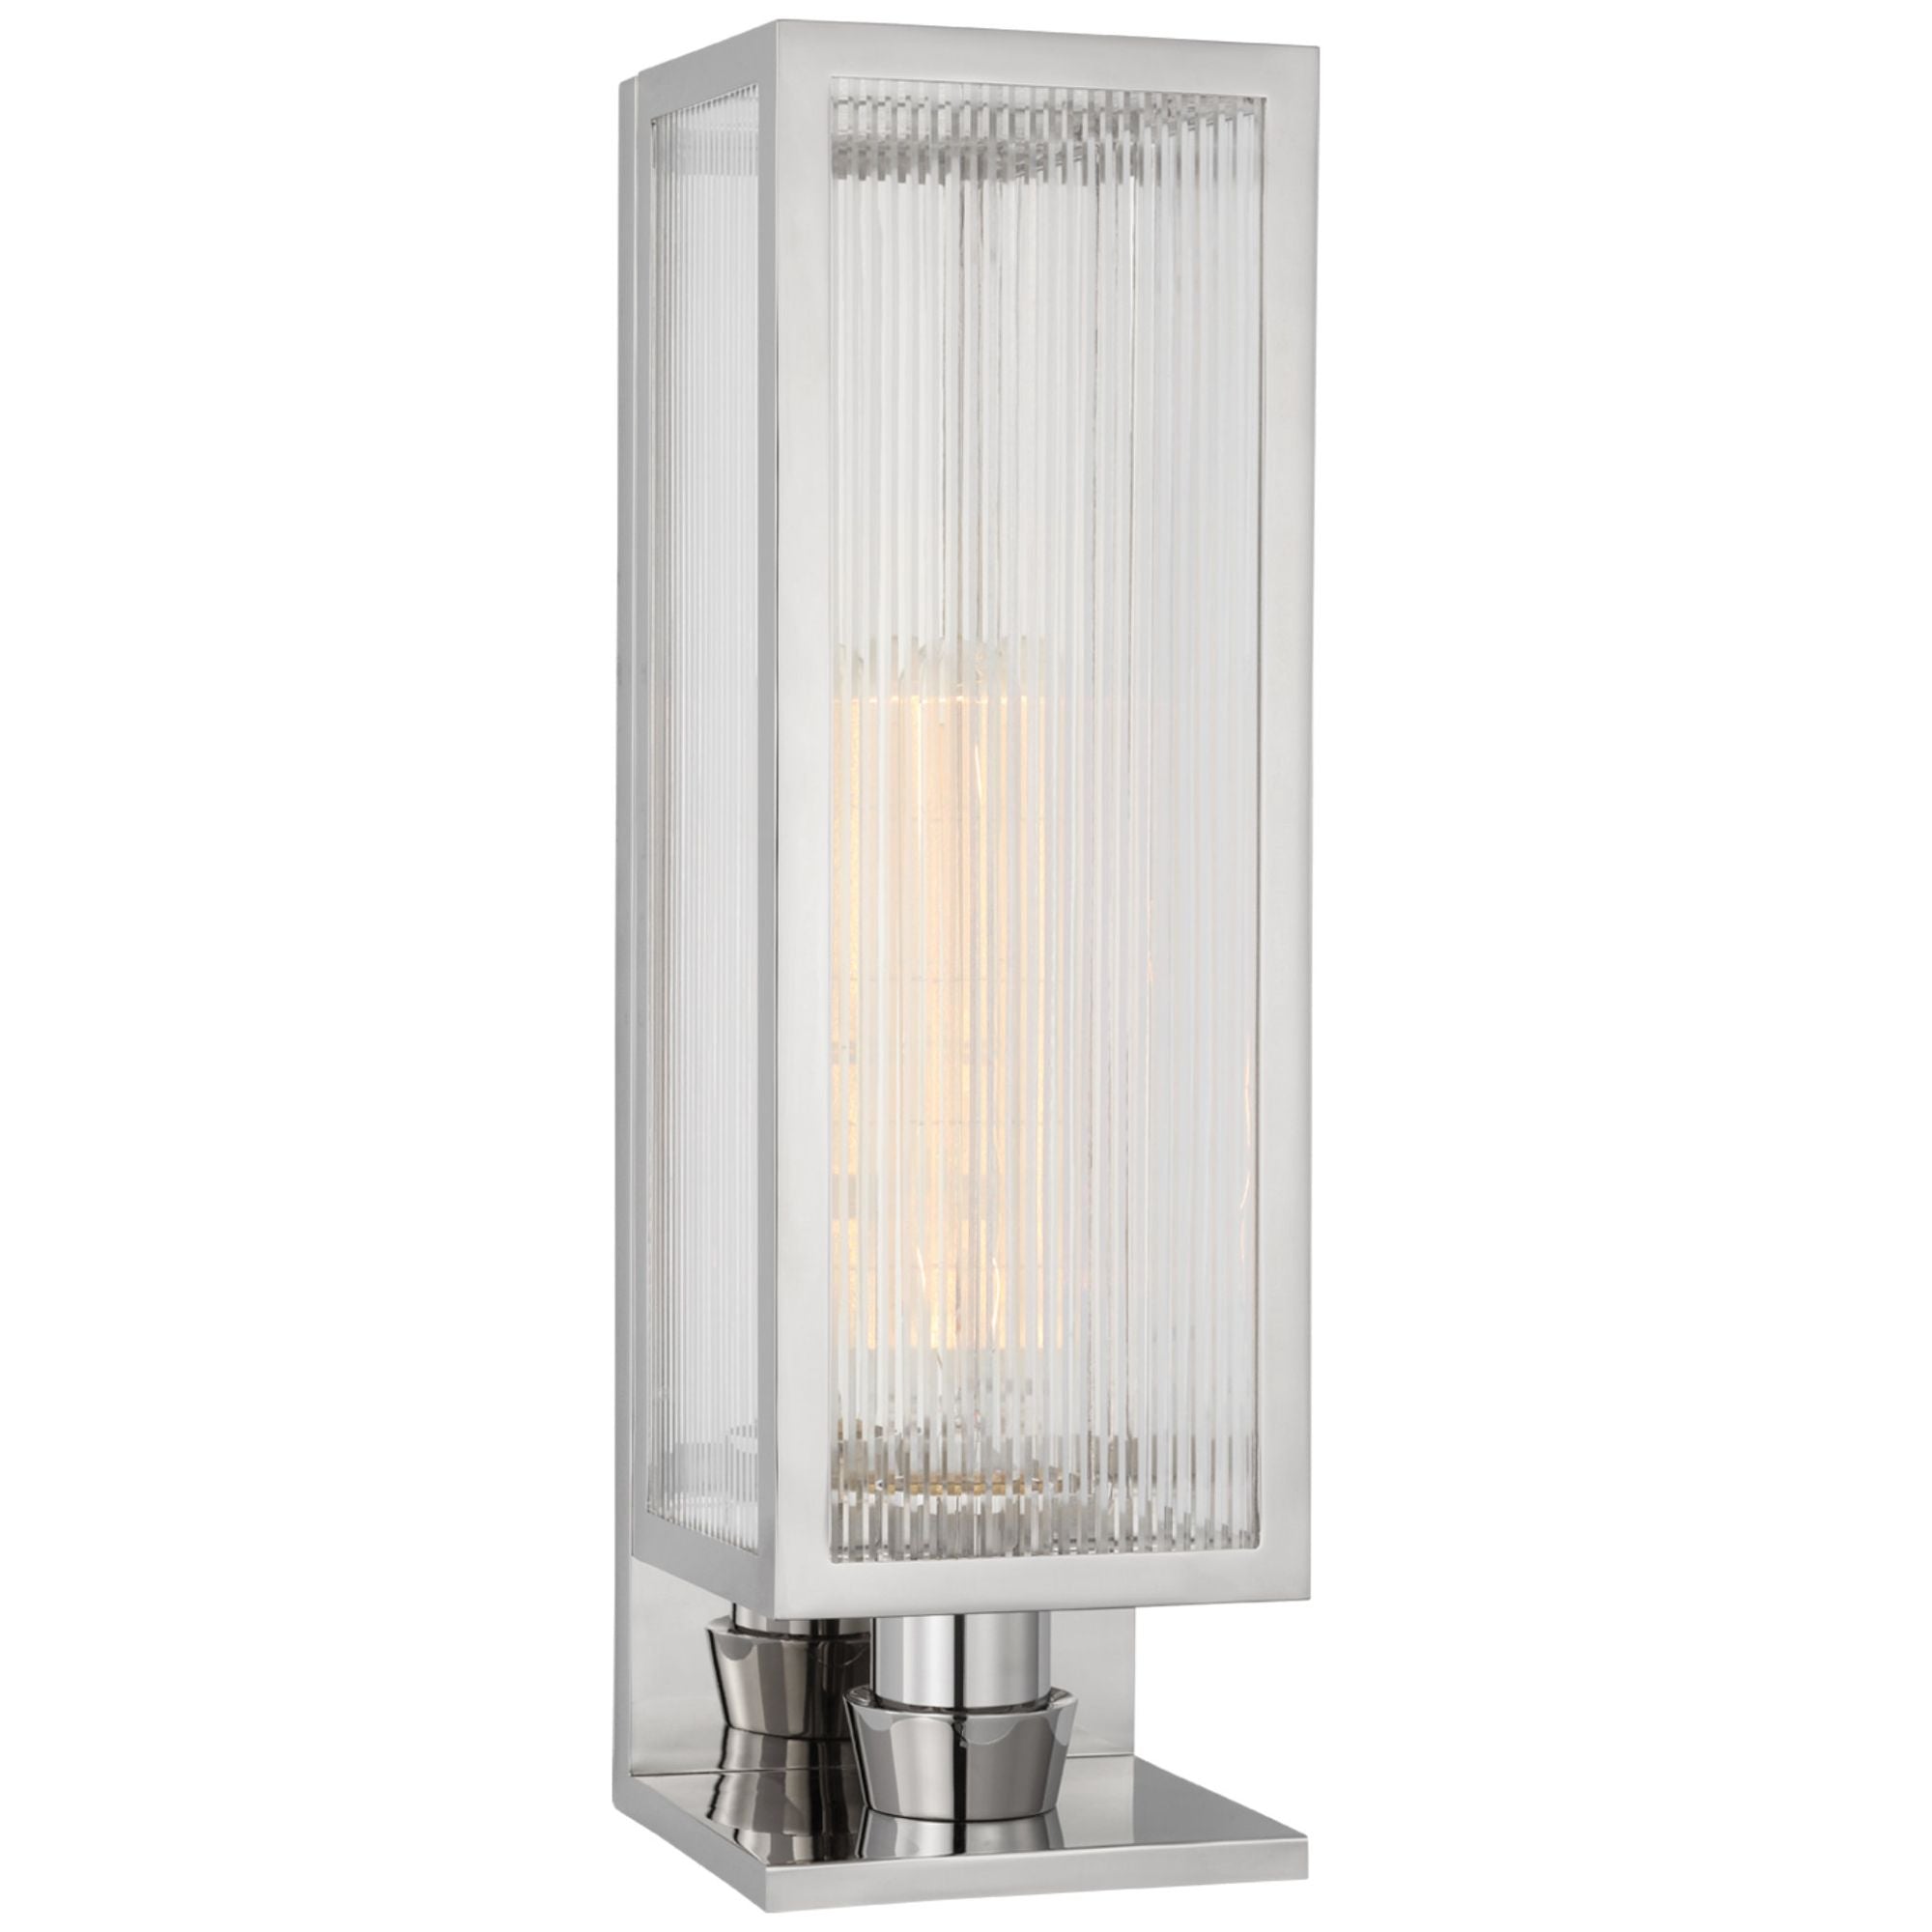 Barbara Barry York 16" Single Box Sconce in Polished Nickel with Clear Ribbed Glass